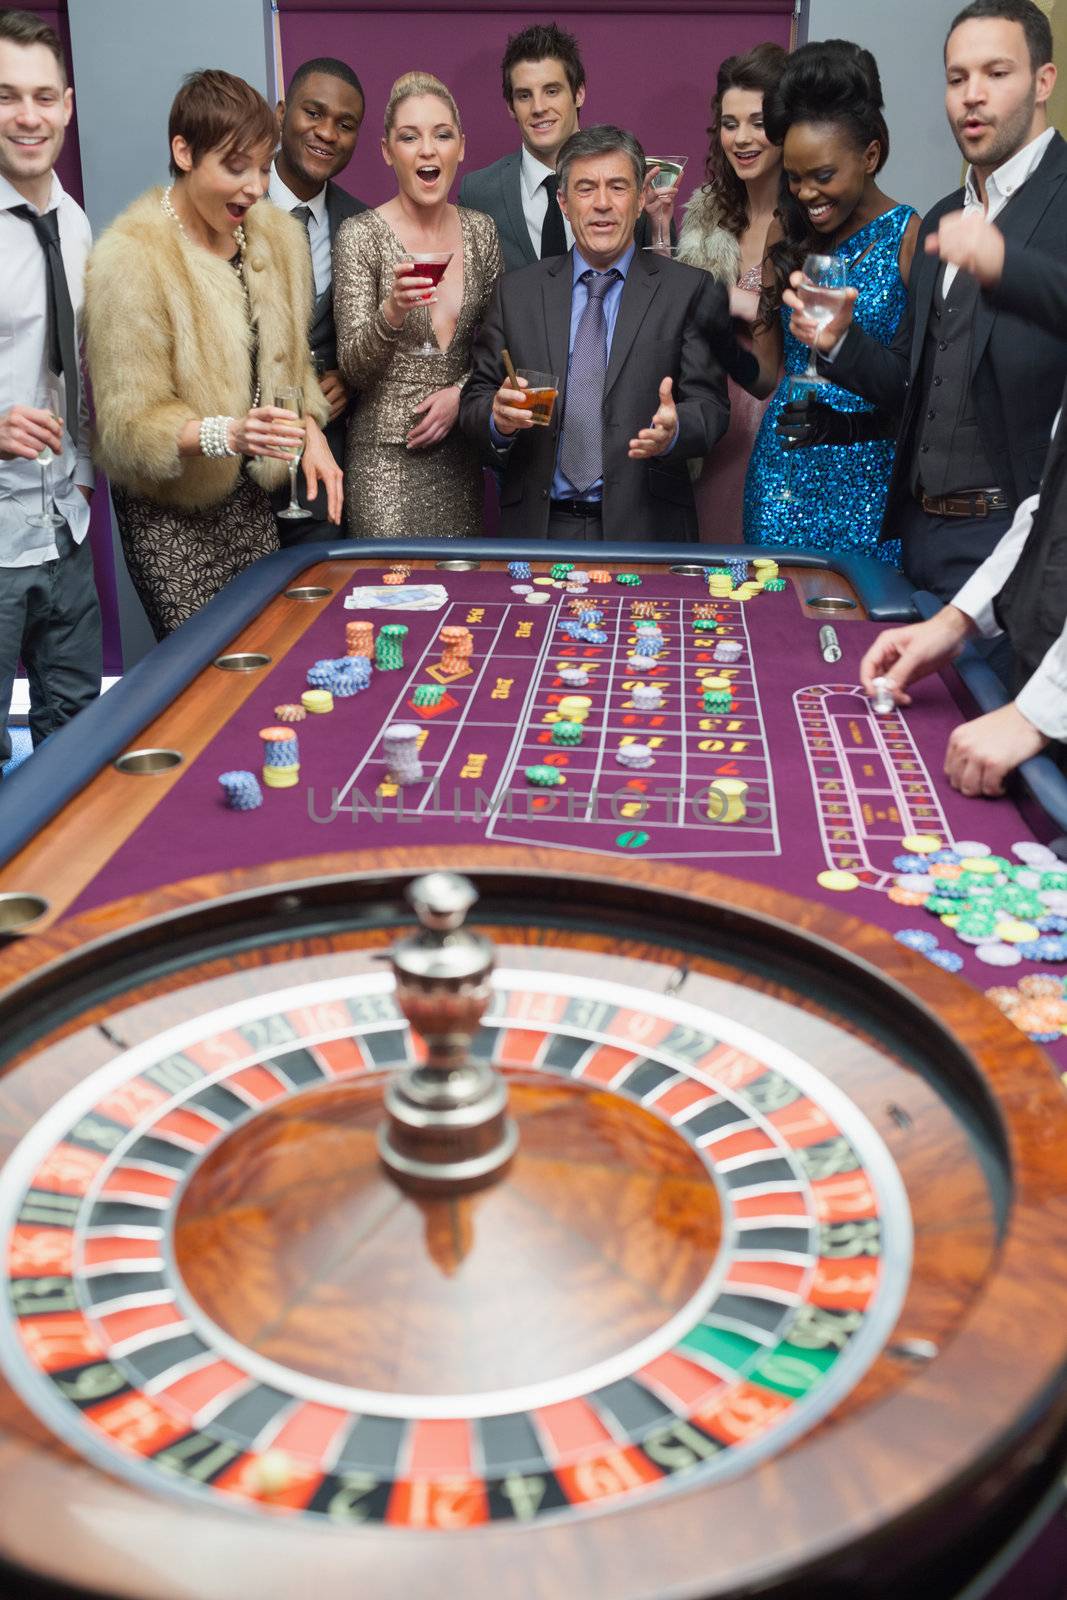 People standing at the roulette table by Wavebreakmedia